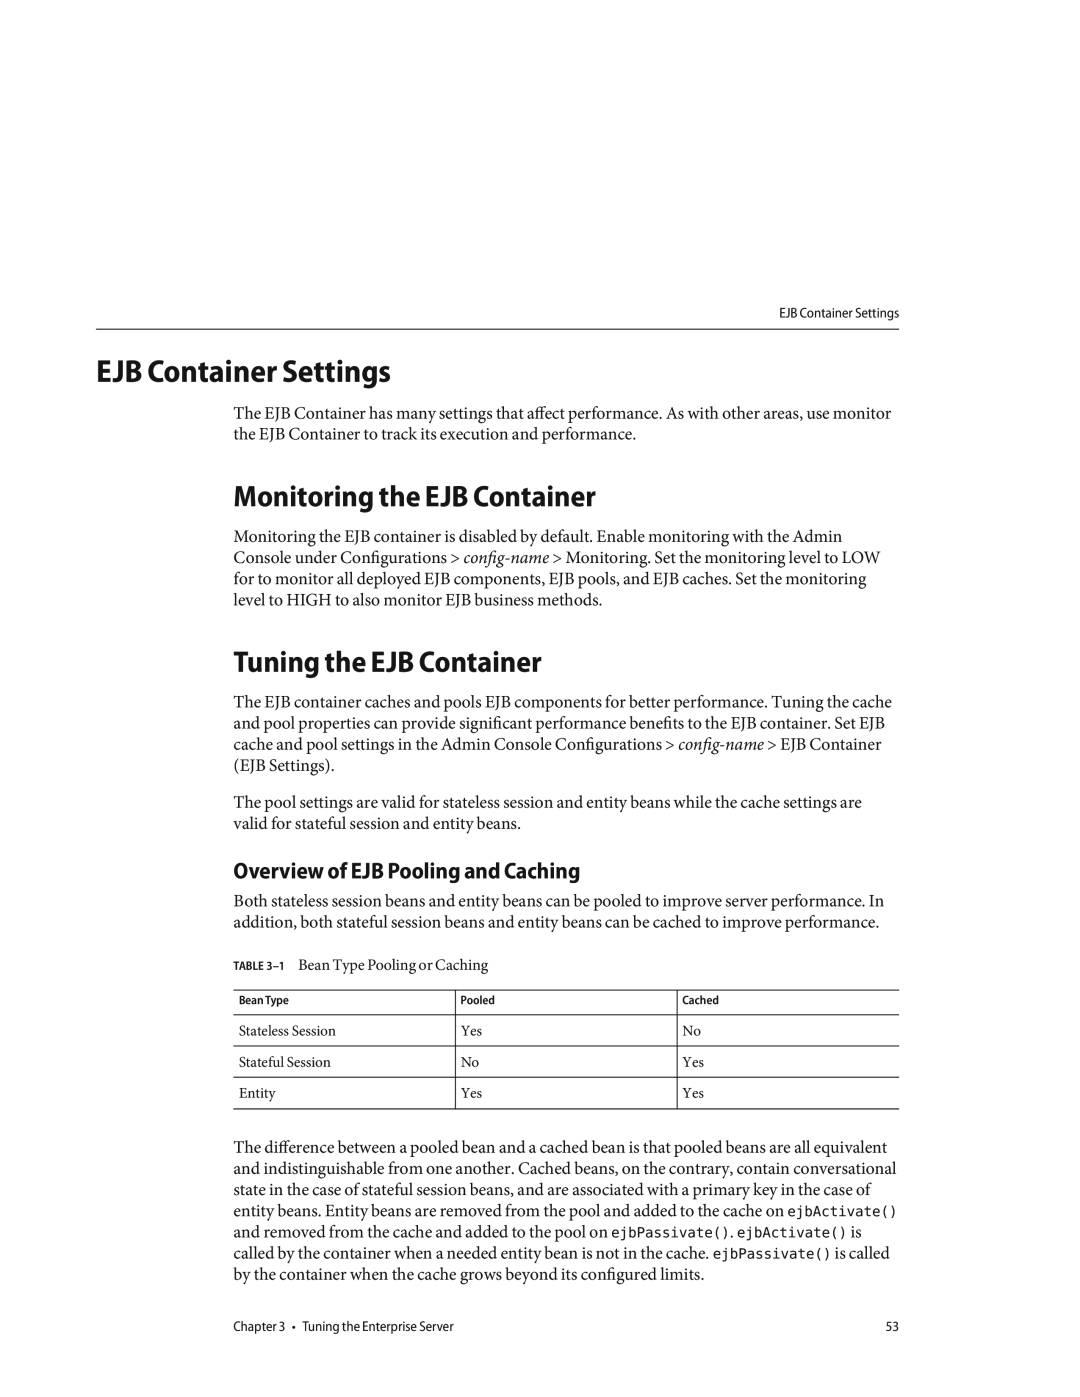 Sun Microsystems 820434310 manual EJB Container Settings, Monitoring the EJB Container, Tuning the EJB Container 